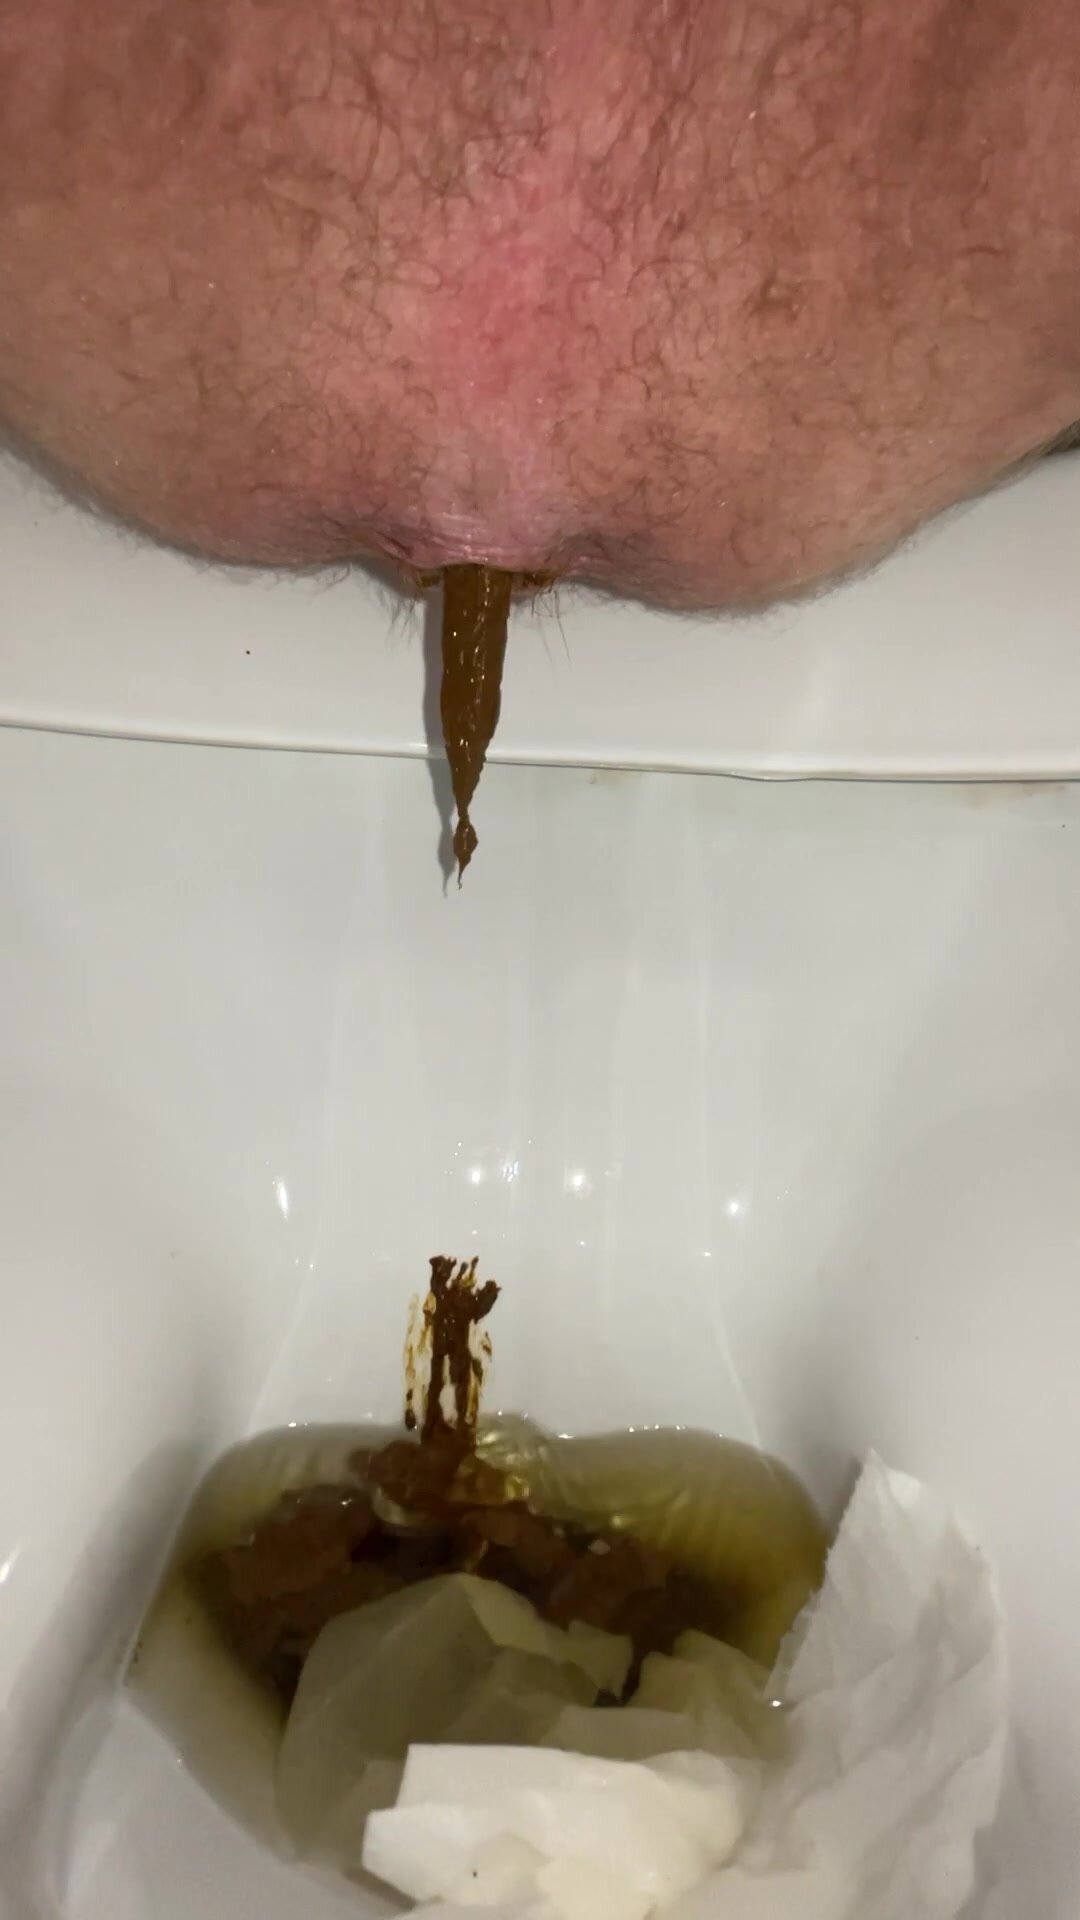 massive shit in the morning